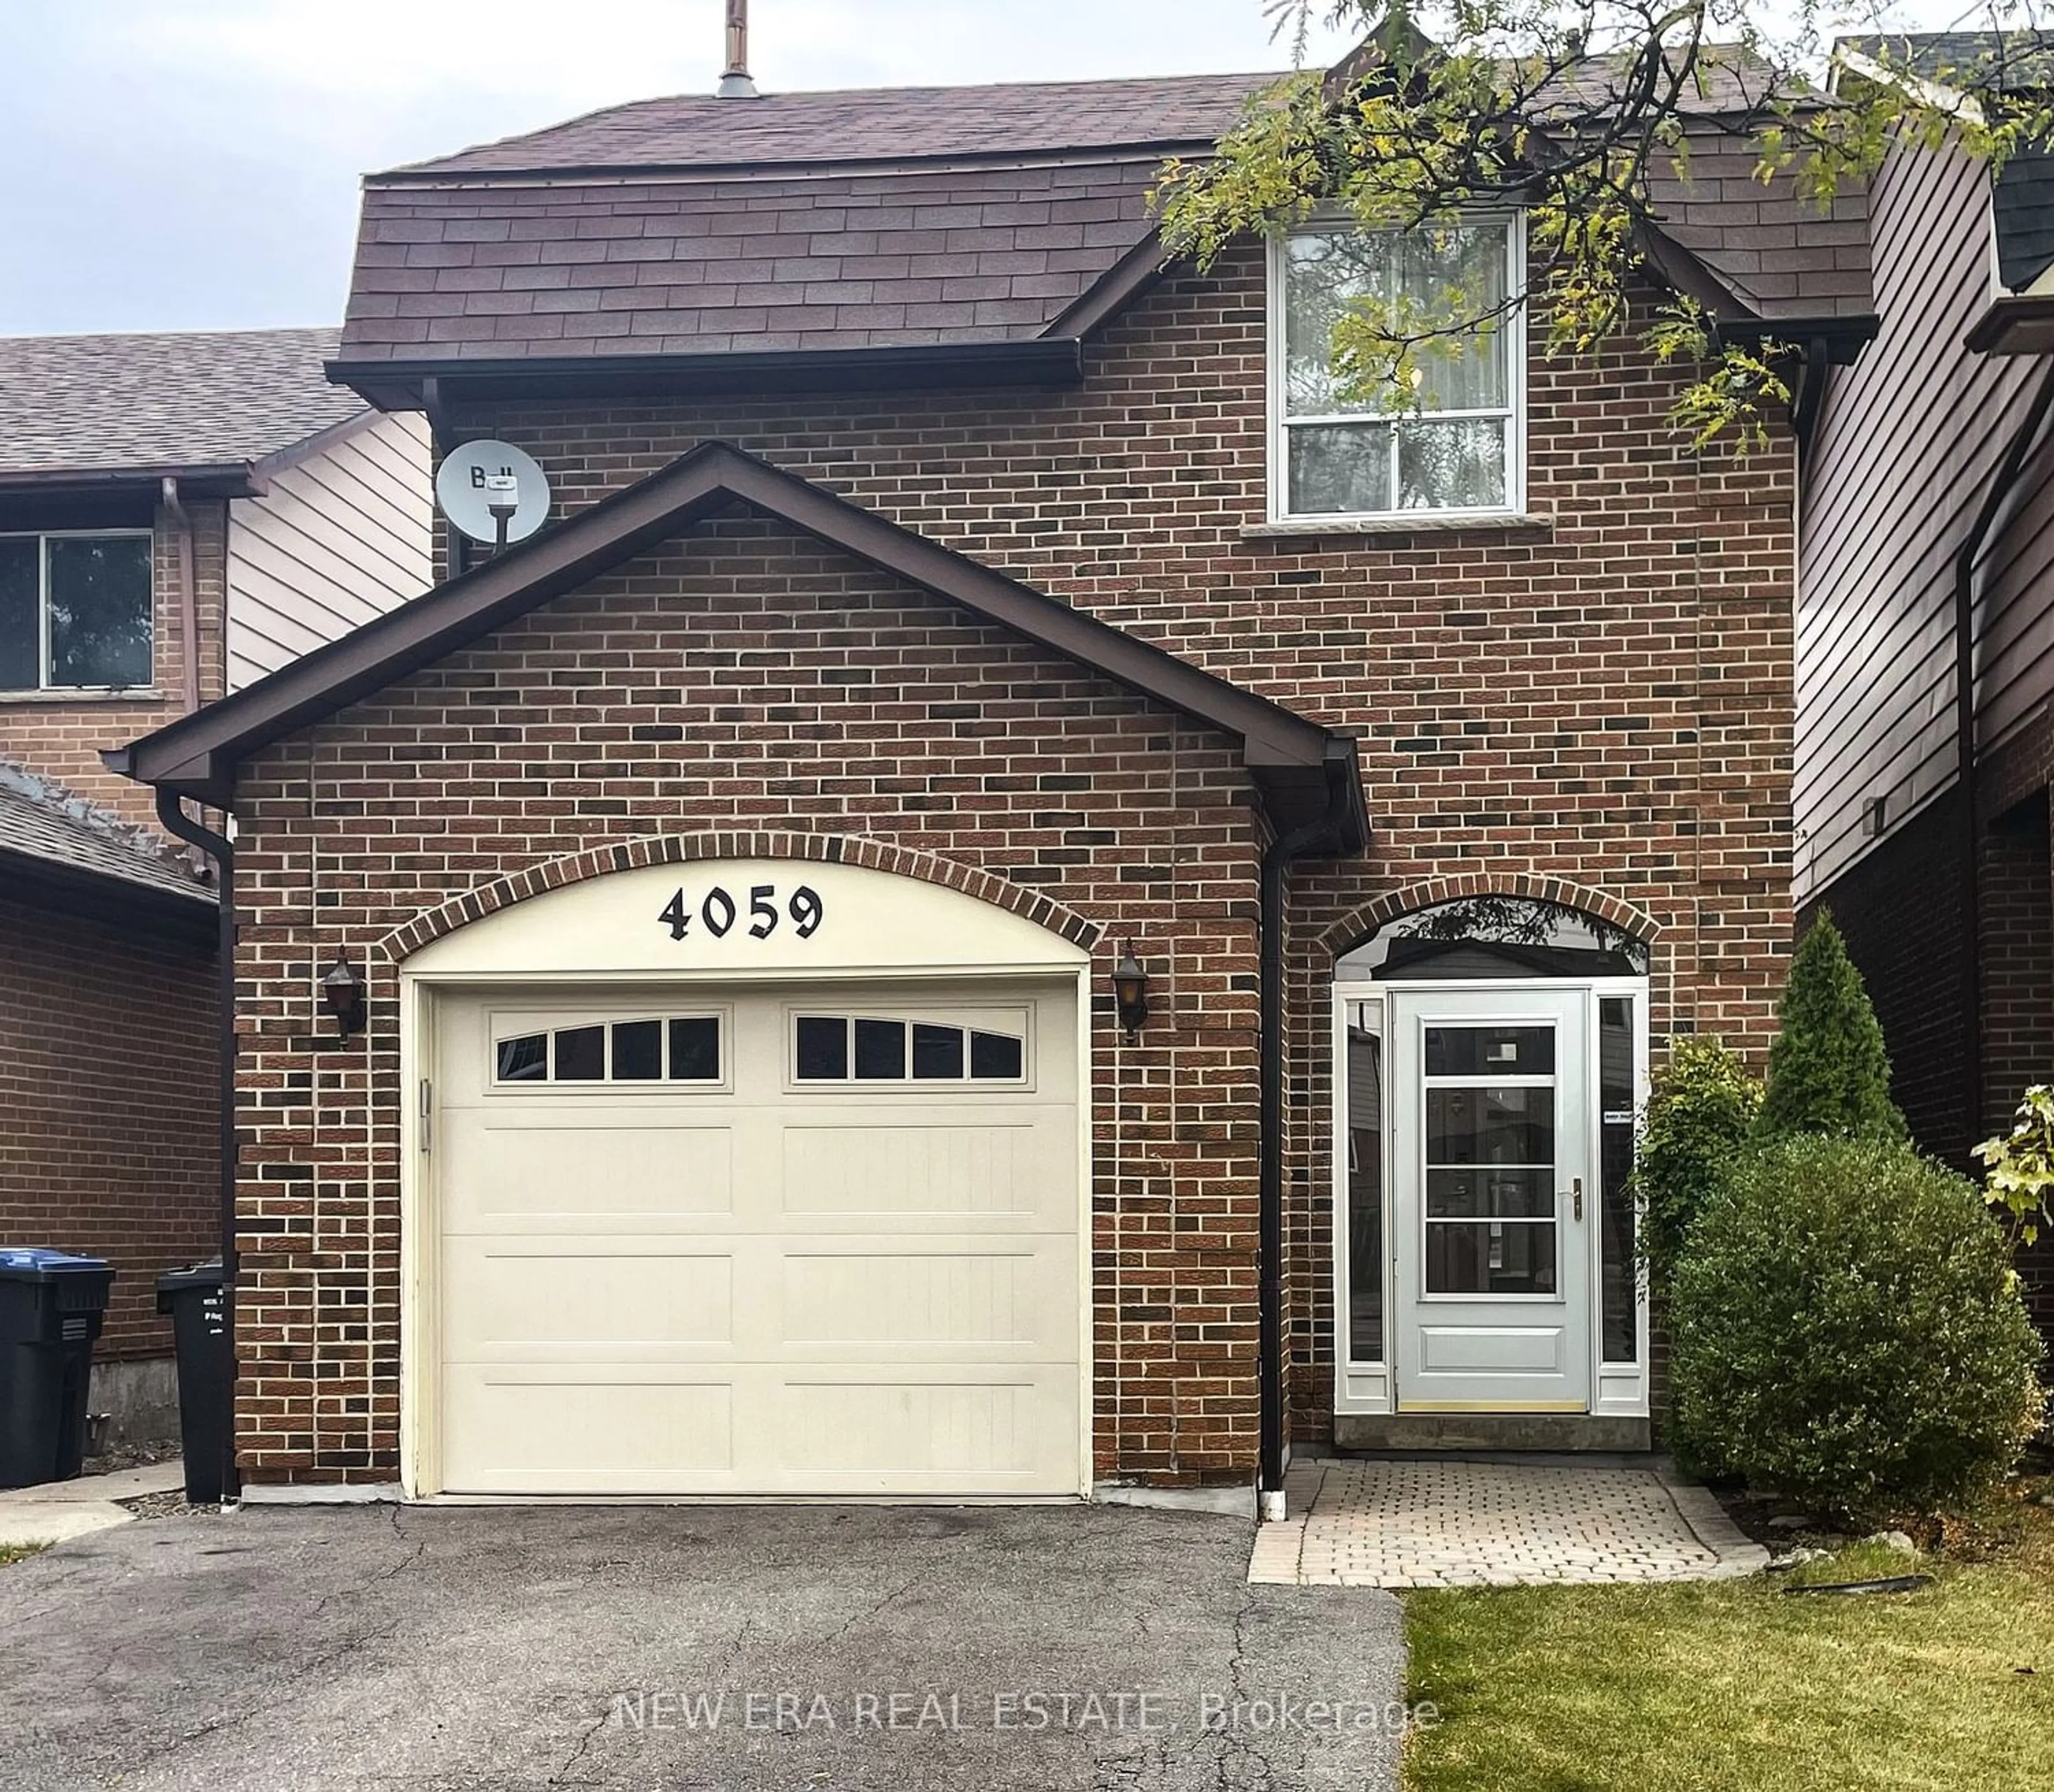 Home with brick exterior material for 4059 Teakwood Dr, Mississauga Ontario L5C 3L3